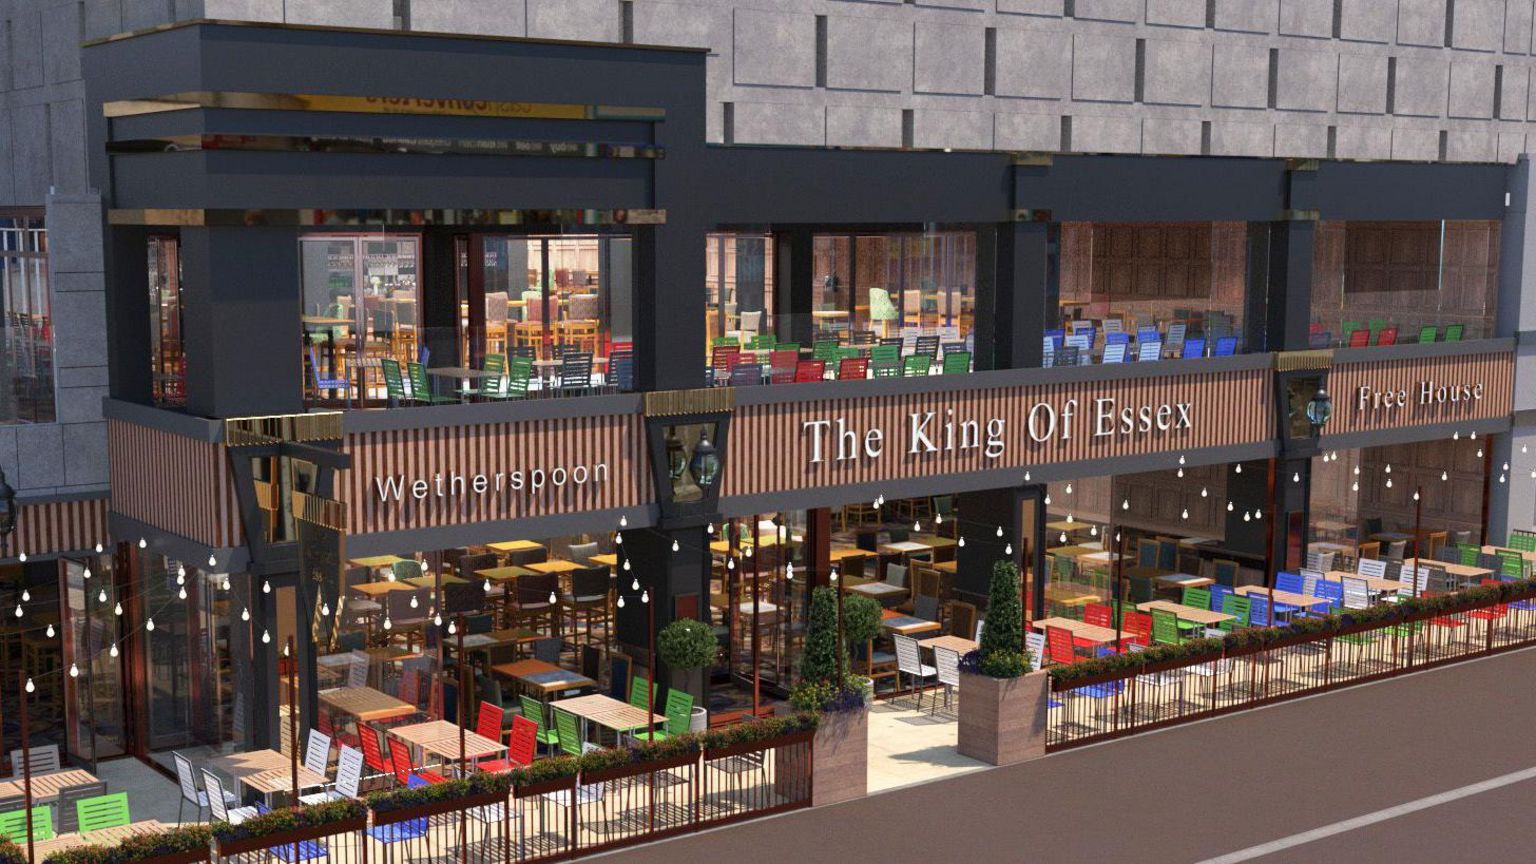 An artist's impression of The King of Essex pub, a large venue that takes up two floors and is packed with tables